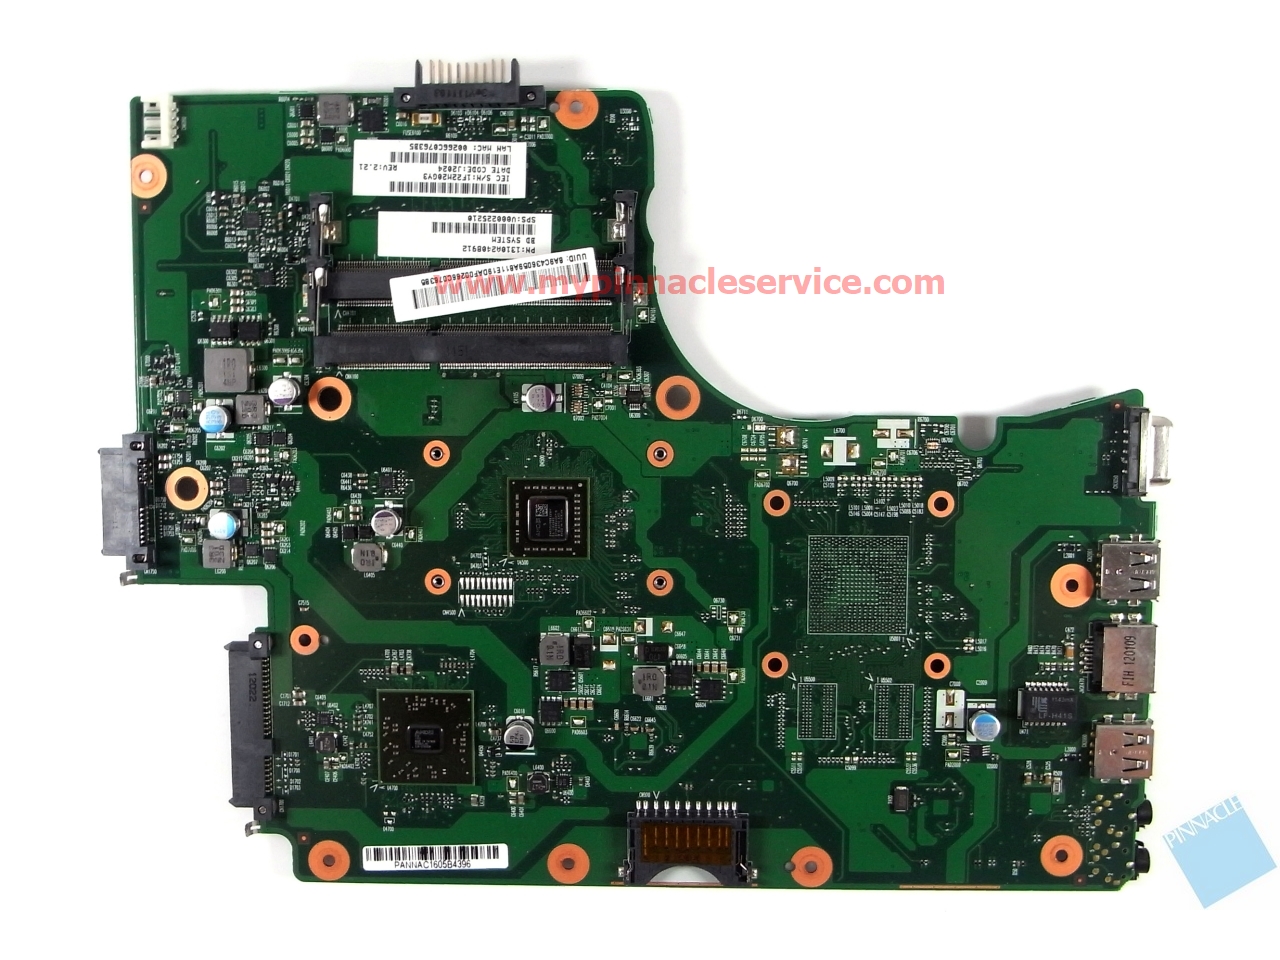 v000225210-motherboard-for-toshiba-satellite-c650d-c655d-6050a2408901-1310a2408912-r0011273.jpg